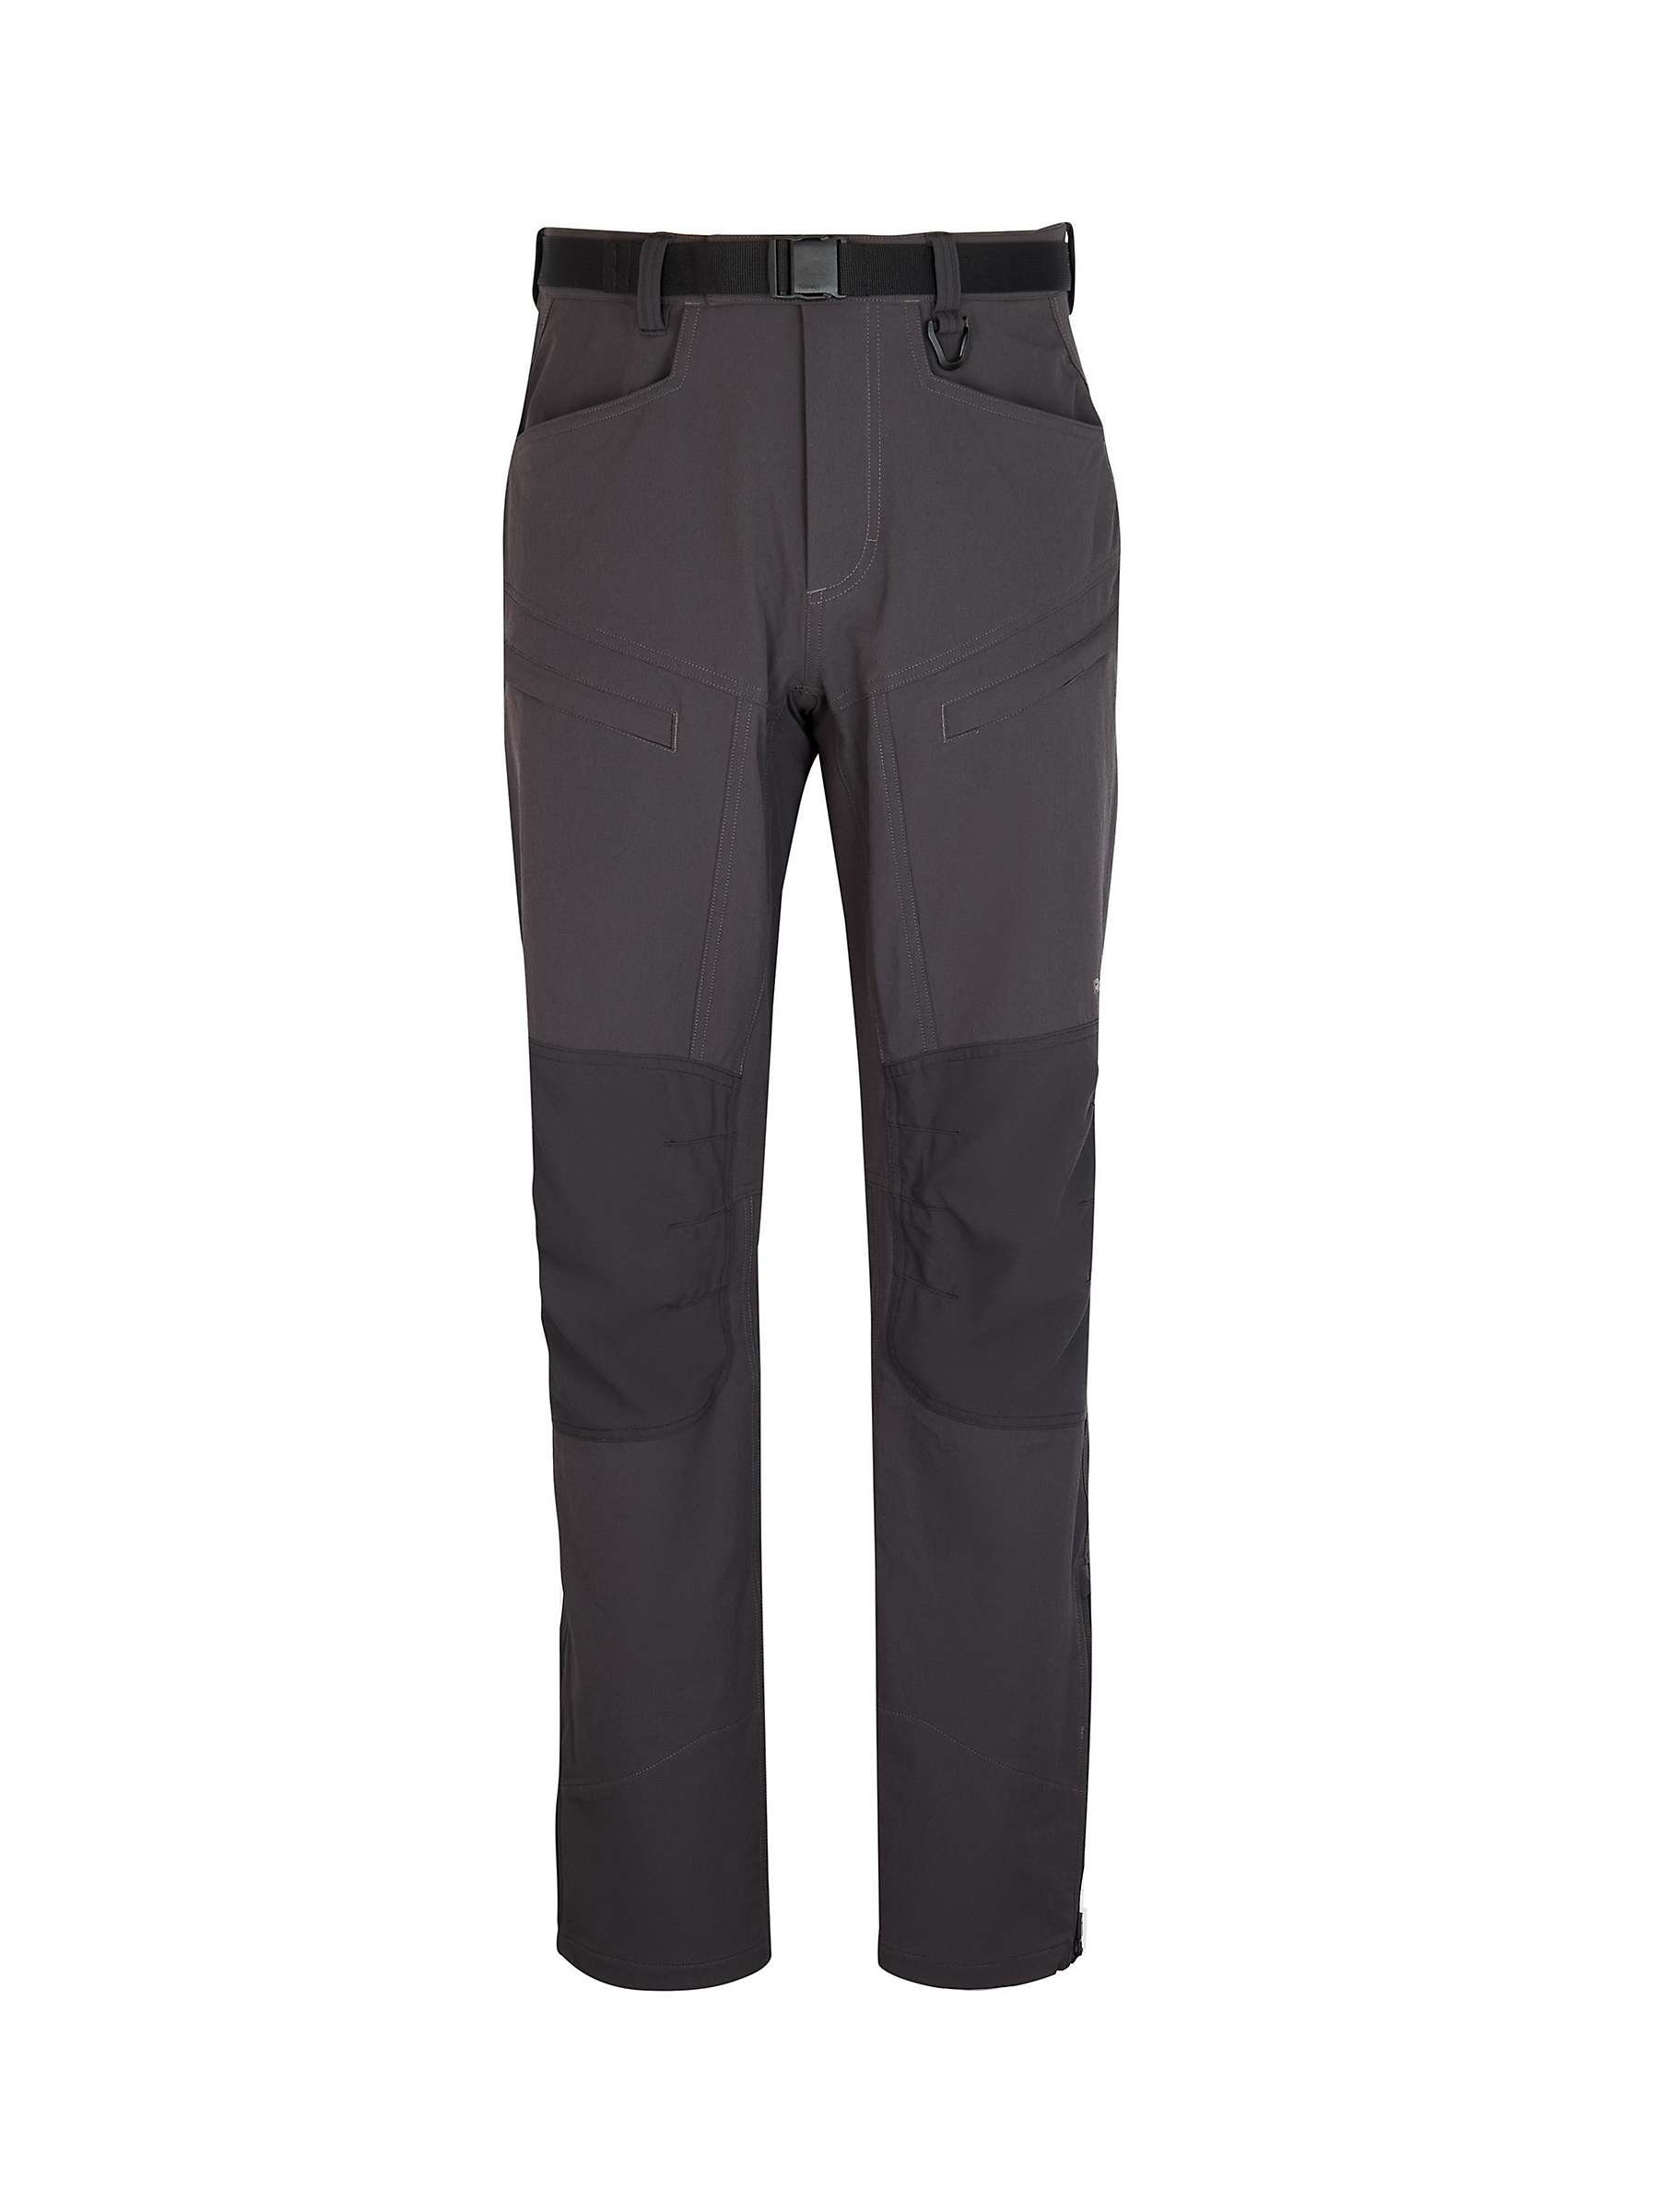 Buy Rohan Fjell Hiking Trousers Online at johnlewis.com